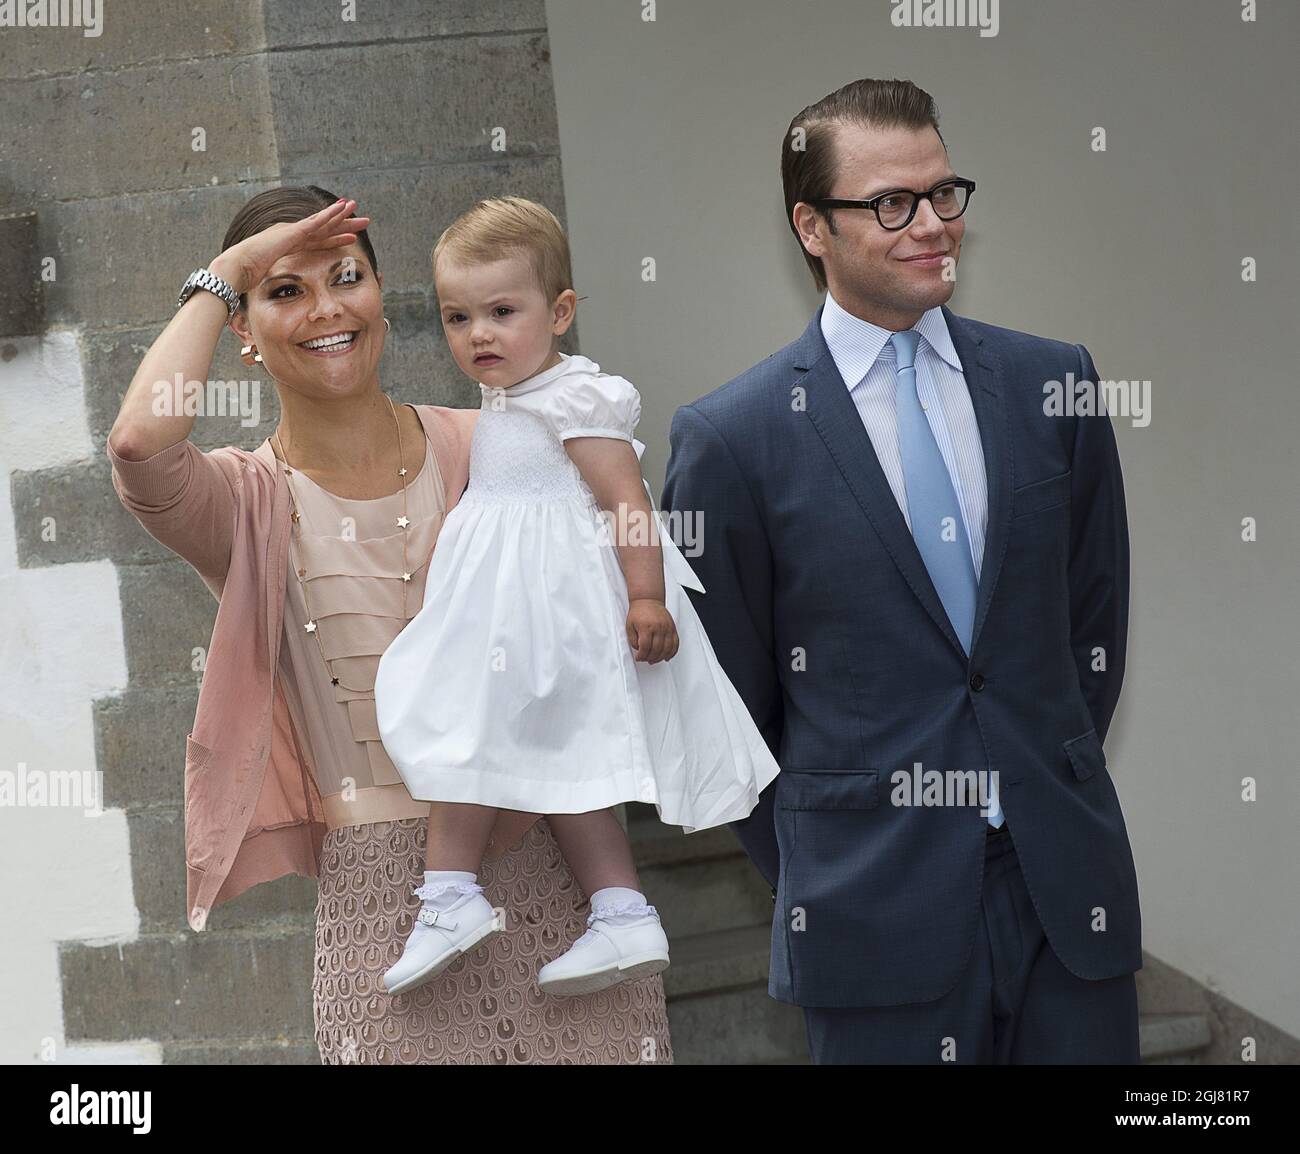 BORGHOLM 20130714 Swedish Crown Princess Victoria, Prince Daniel and their daughter Estelle, at the courtyard of the royal family's summer residence Solliden, on the island of Oeland, Sweden, on July 14, 2012, during the celebrations of Crown Princess Victorias 36th birthday. Photo: Jonas Ekstromer / SCANPIX / code 610030  Stock Photo